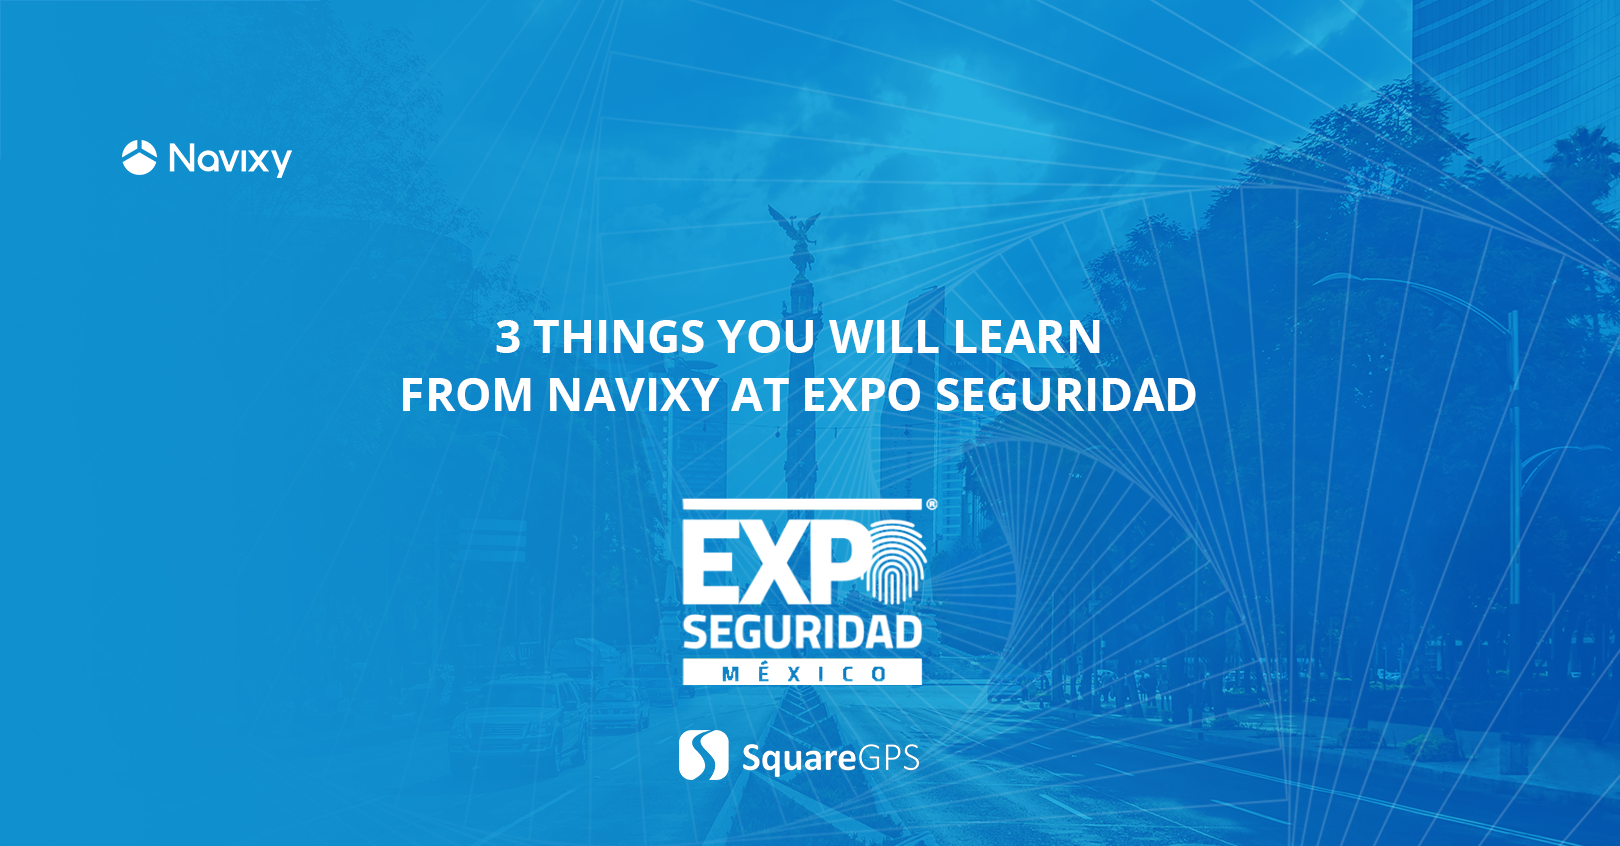 3 things to learn from Navixy at Expo Seguridad Mexico 2022: Cold chain, video telematics, and vehicle recovery